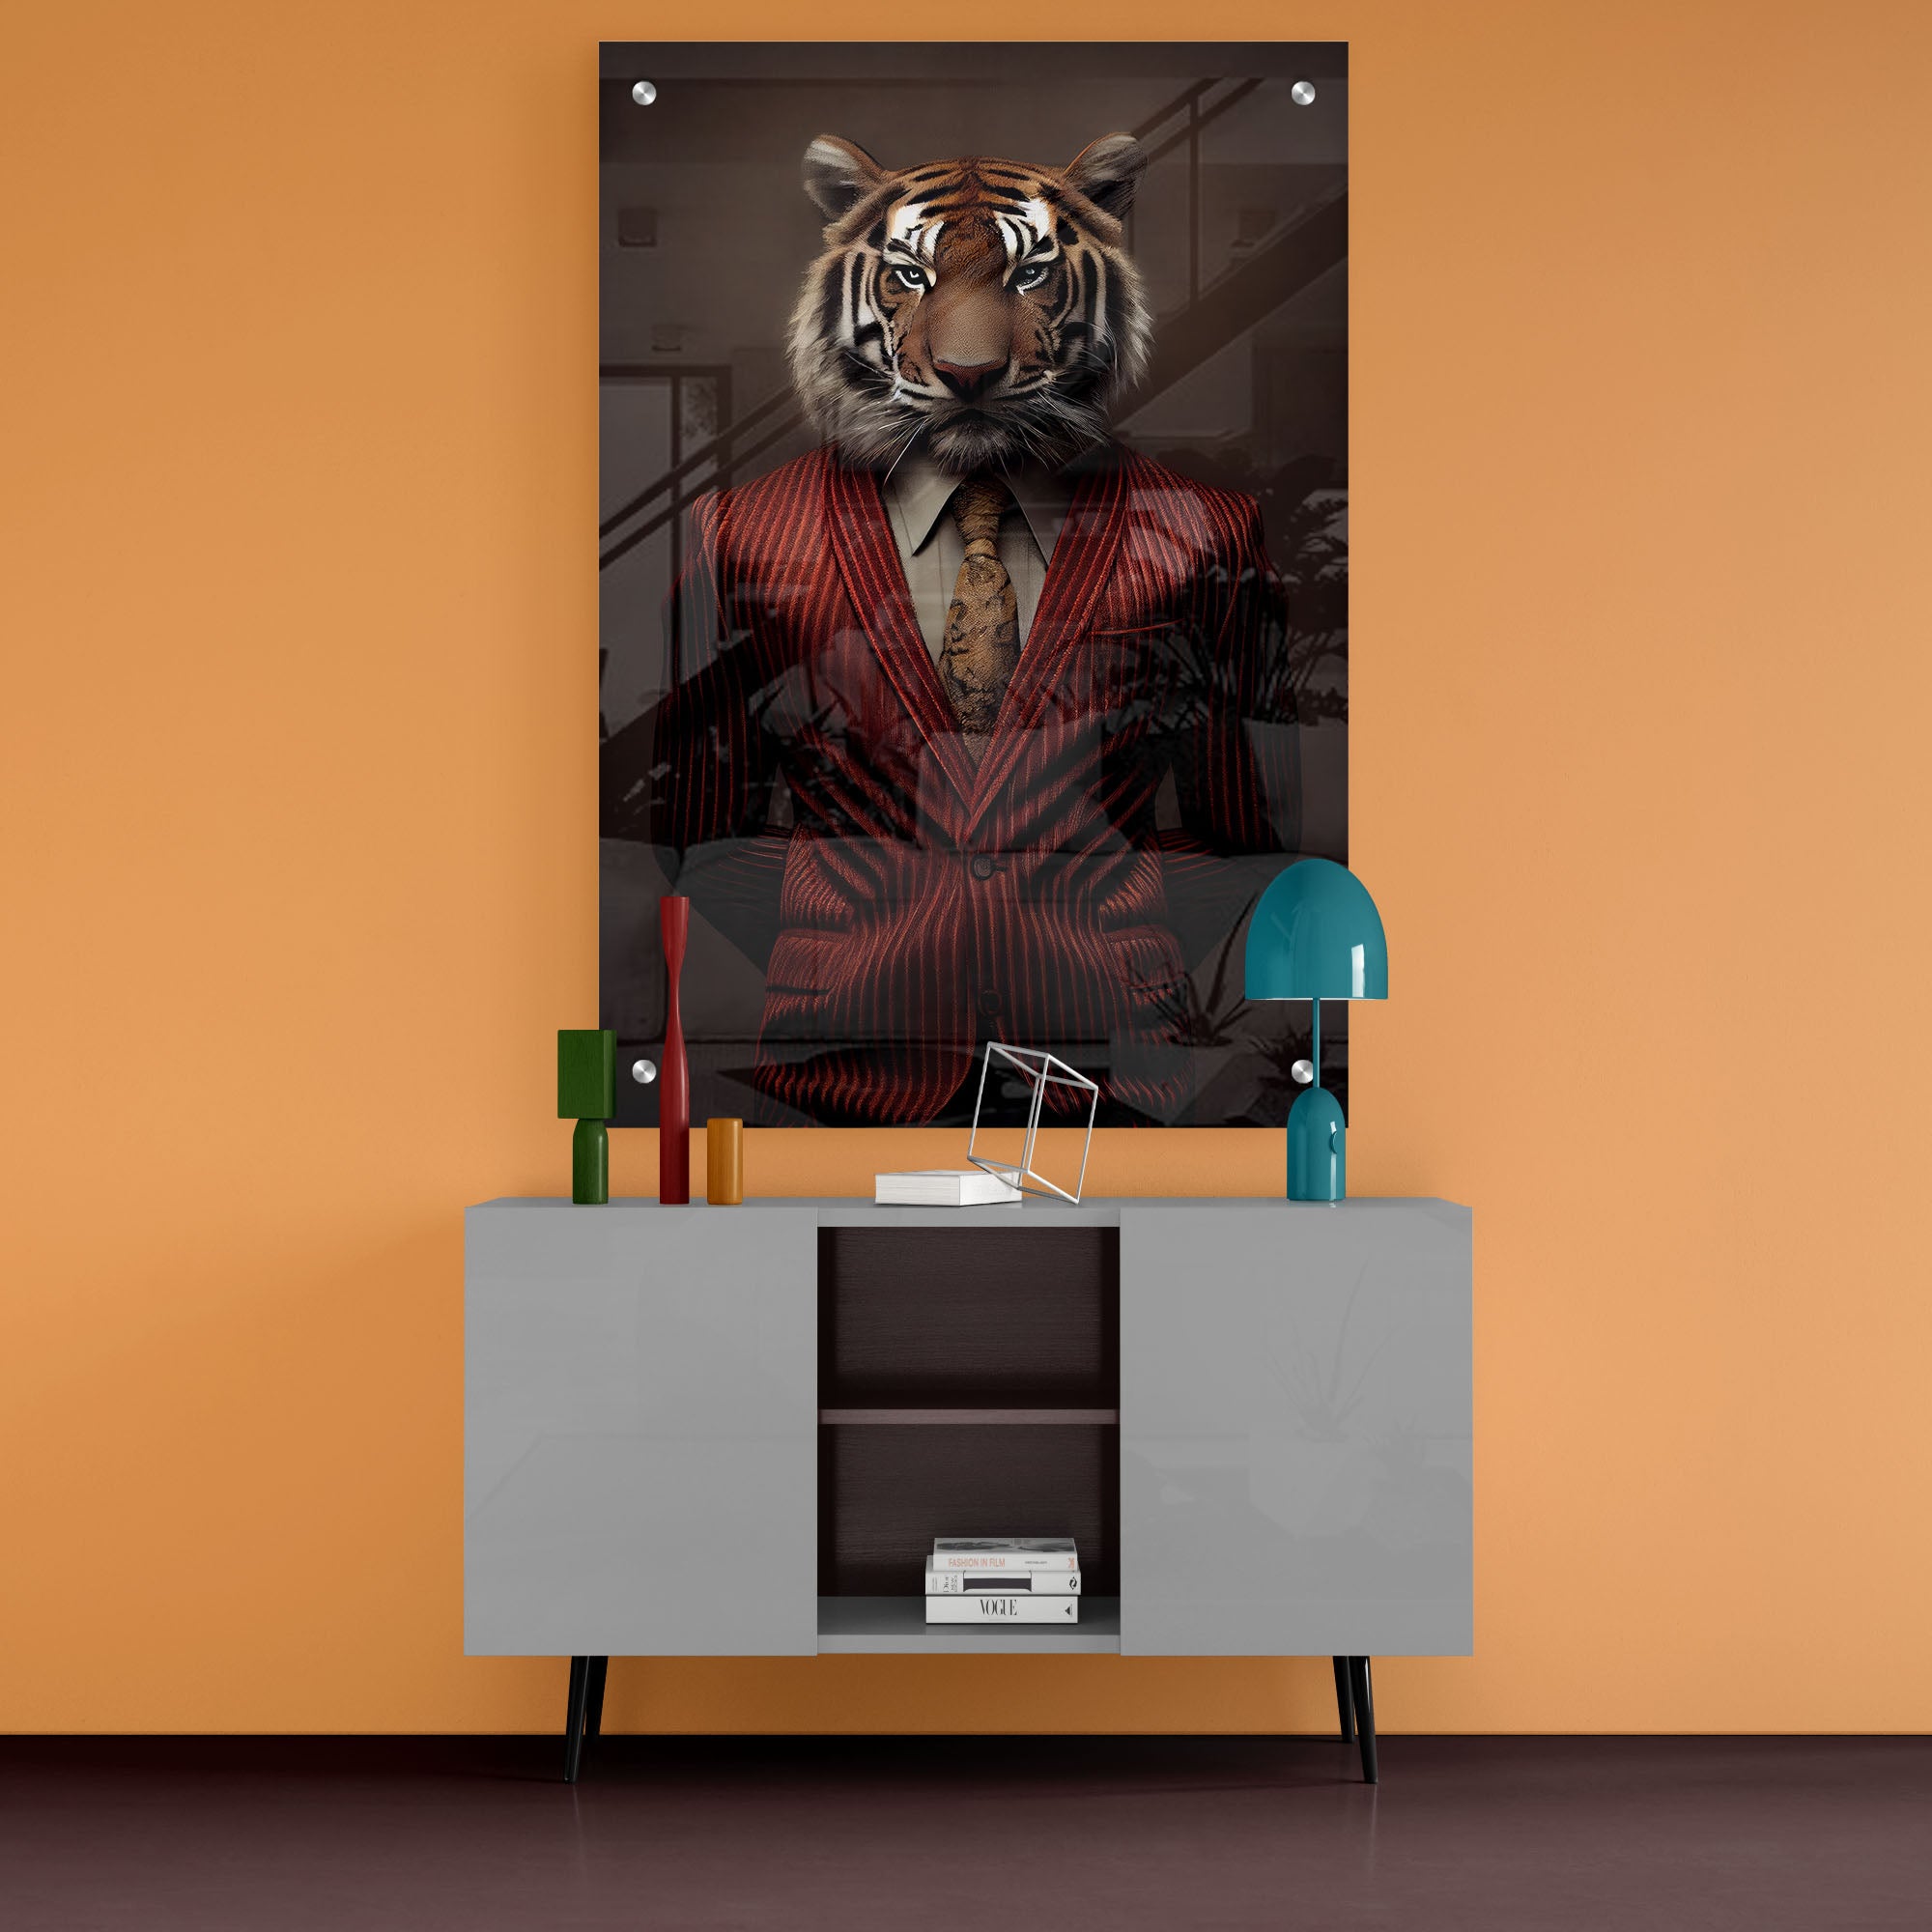 Wild Tiger In A Classy Suit Acrylic Wall Painting